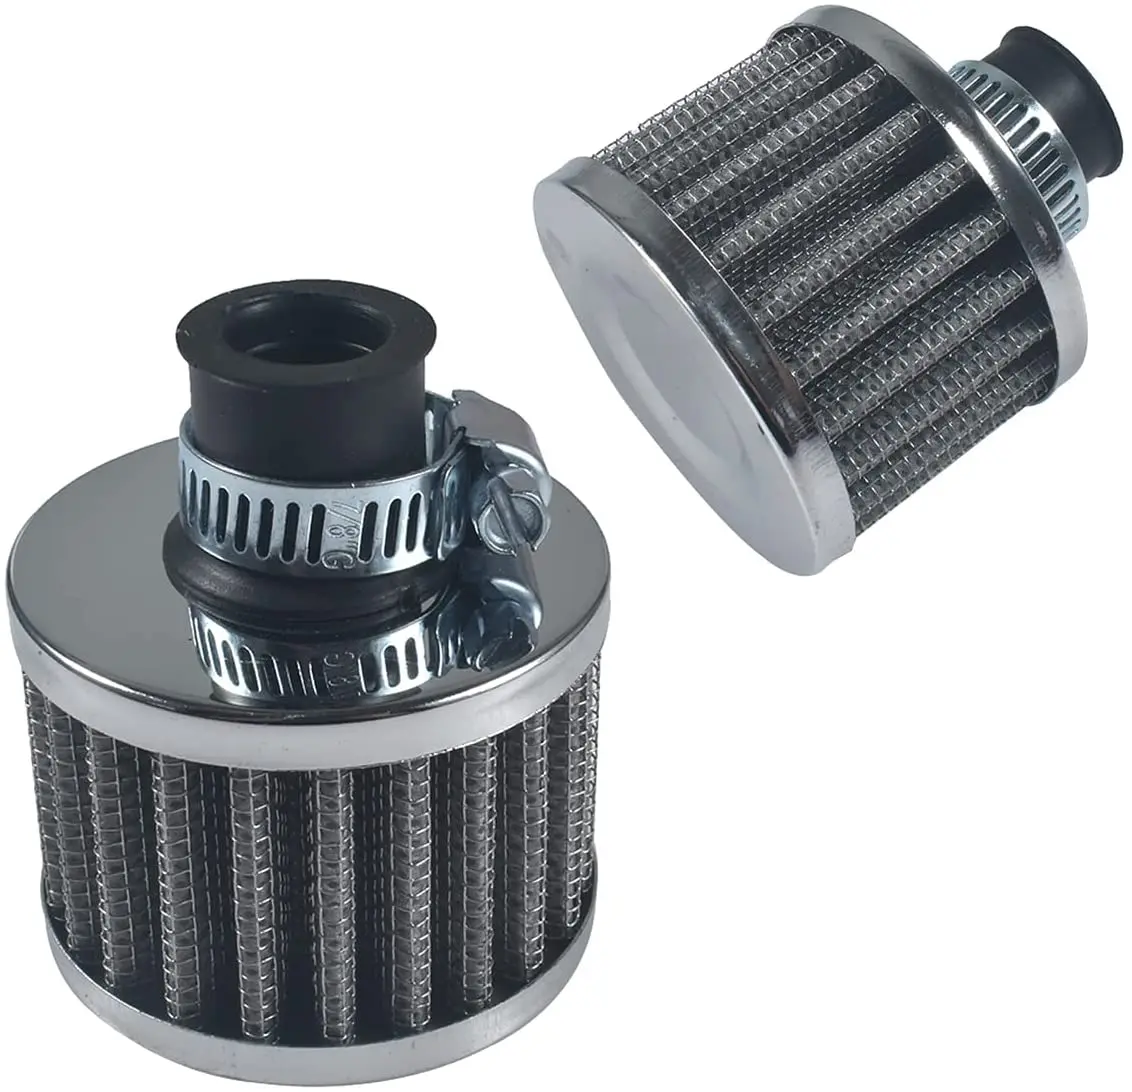 

2PCS 12mm Mini Universal Sliver Motor Cone Cold Clean Air Intake Filter Turbo Vent Breather Go Kart